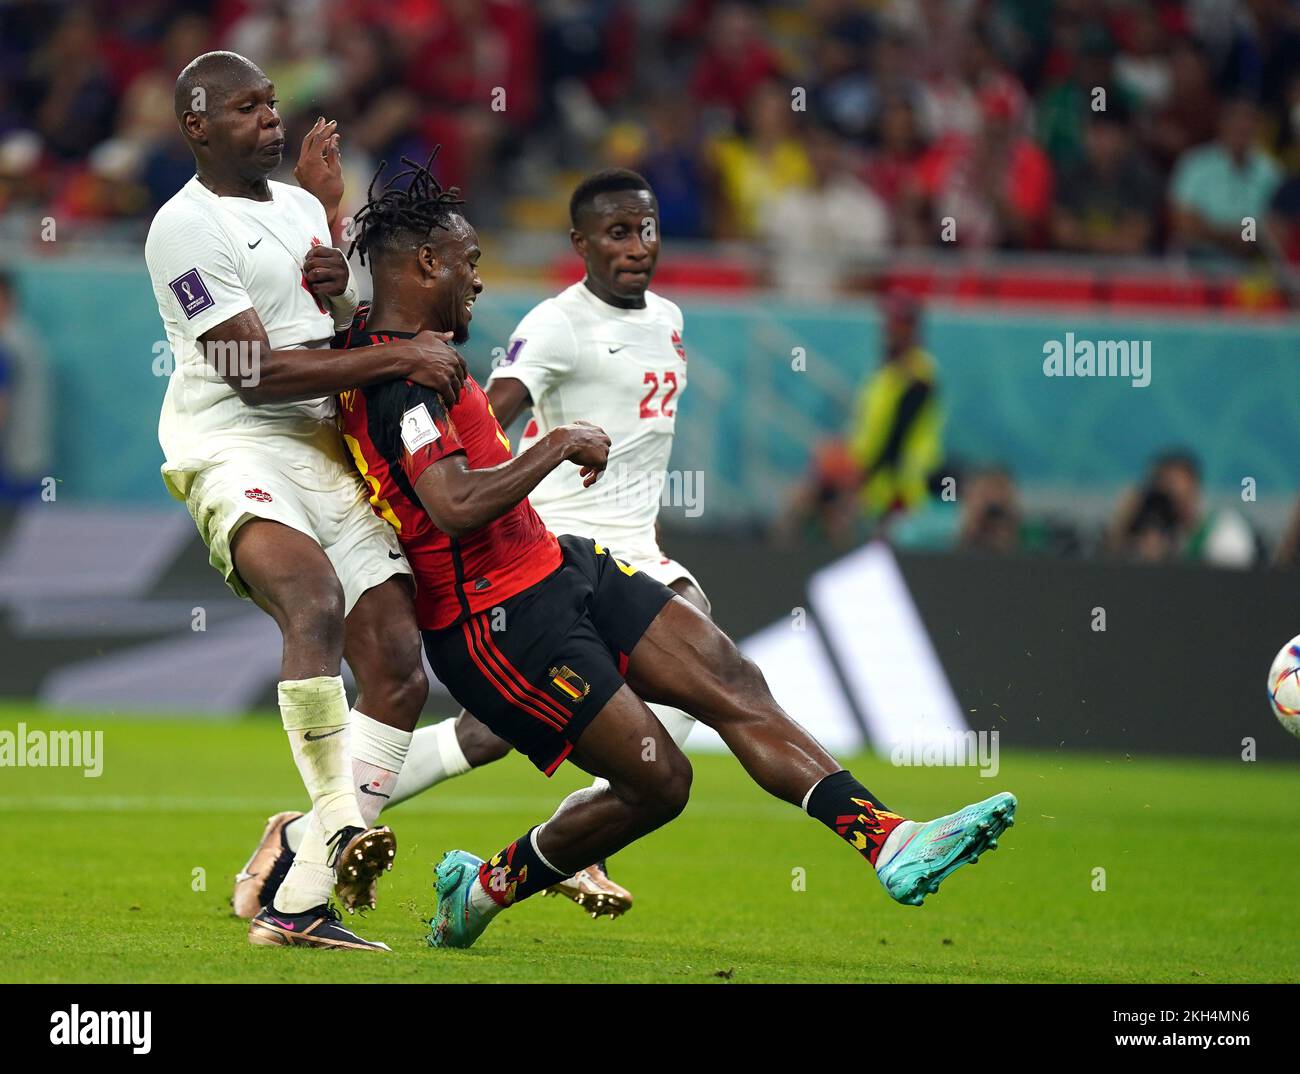 Belgium's Michy Batshuayi (centre) scores their side's first goal of the game during the FIFA World Cup Group F match at the Ahmad bin Ali Stadium, Al Rayyan. Picture date: Wednesday November 23, 2022. Stock Photo